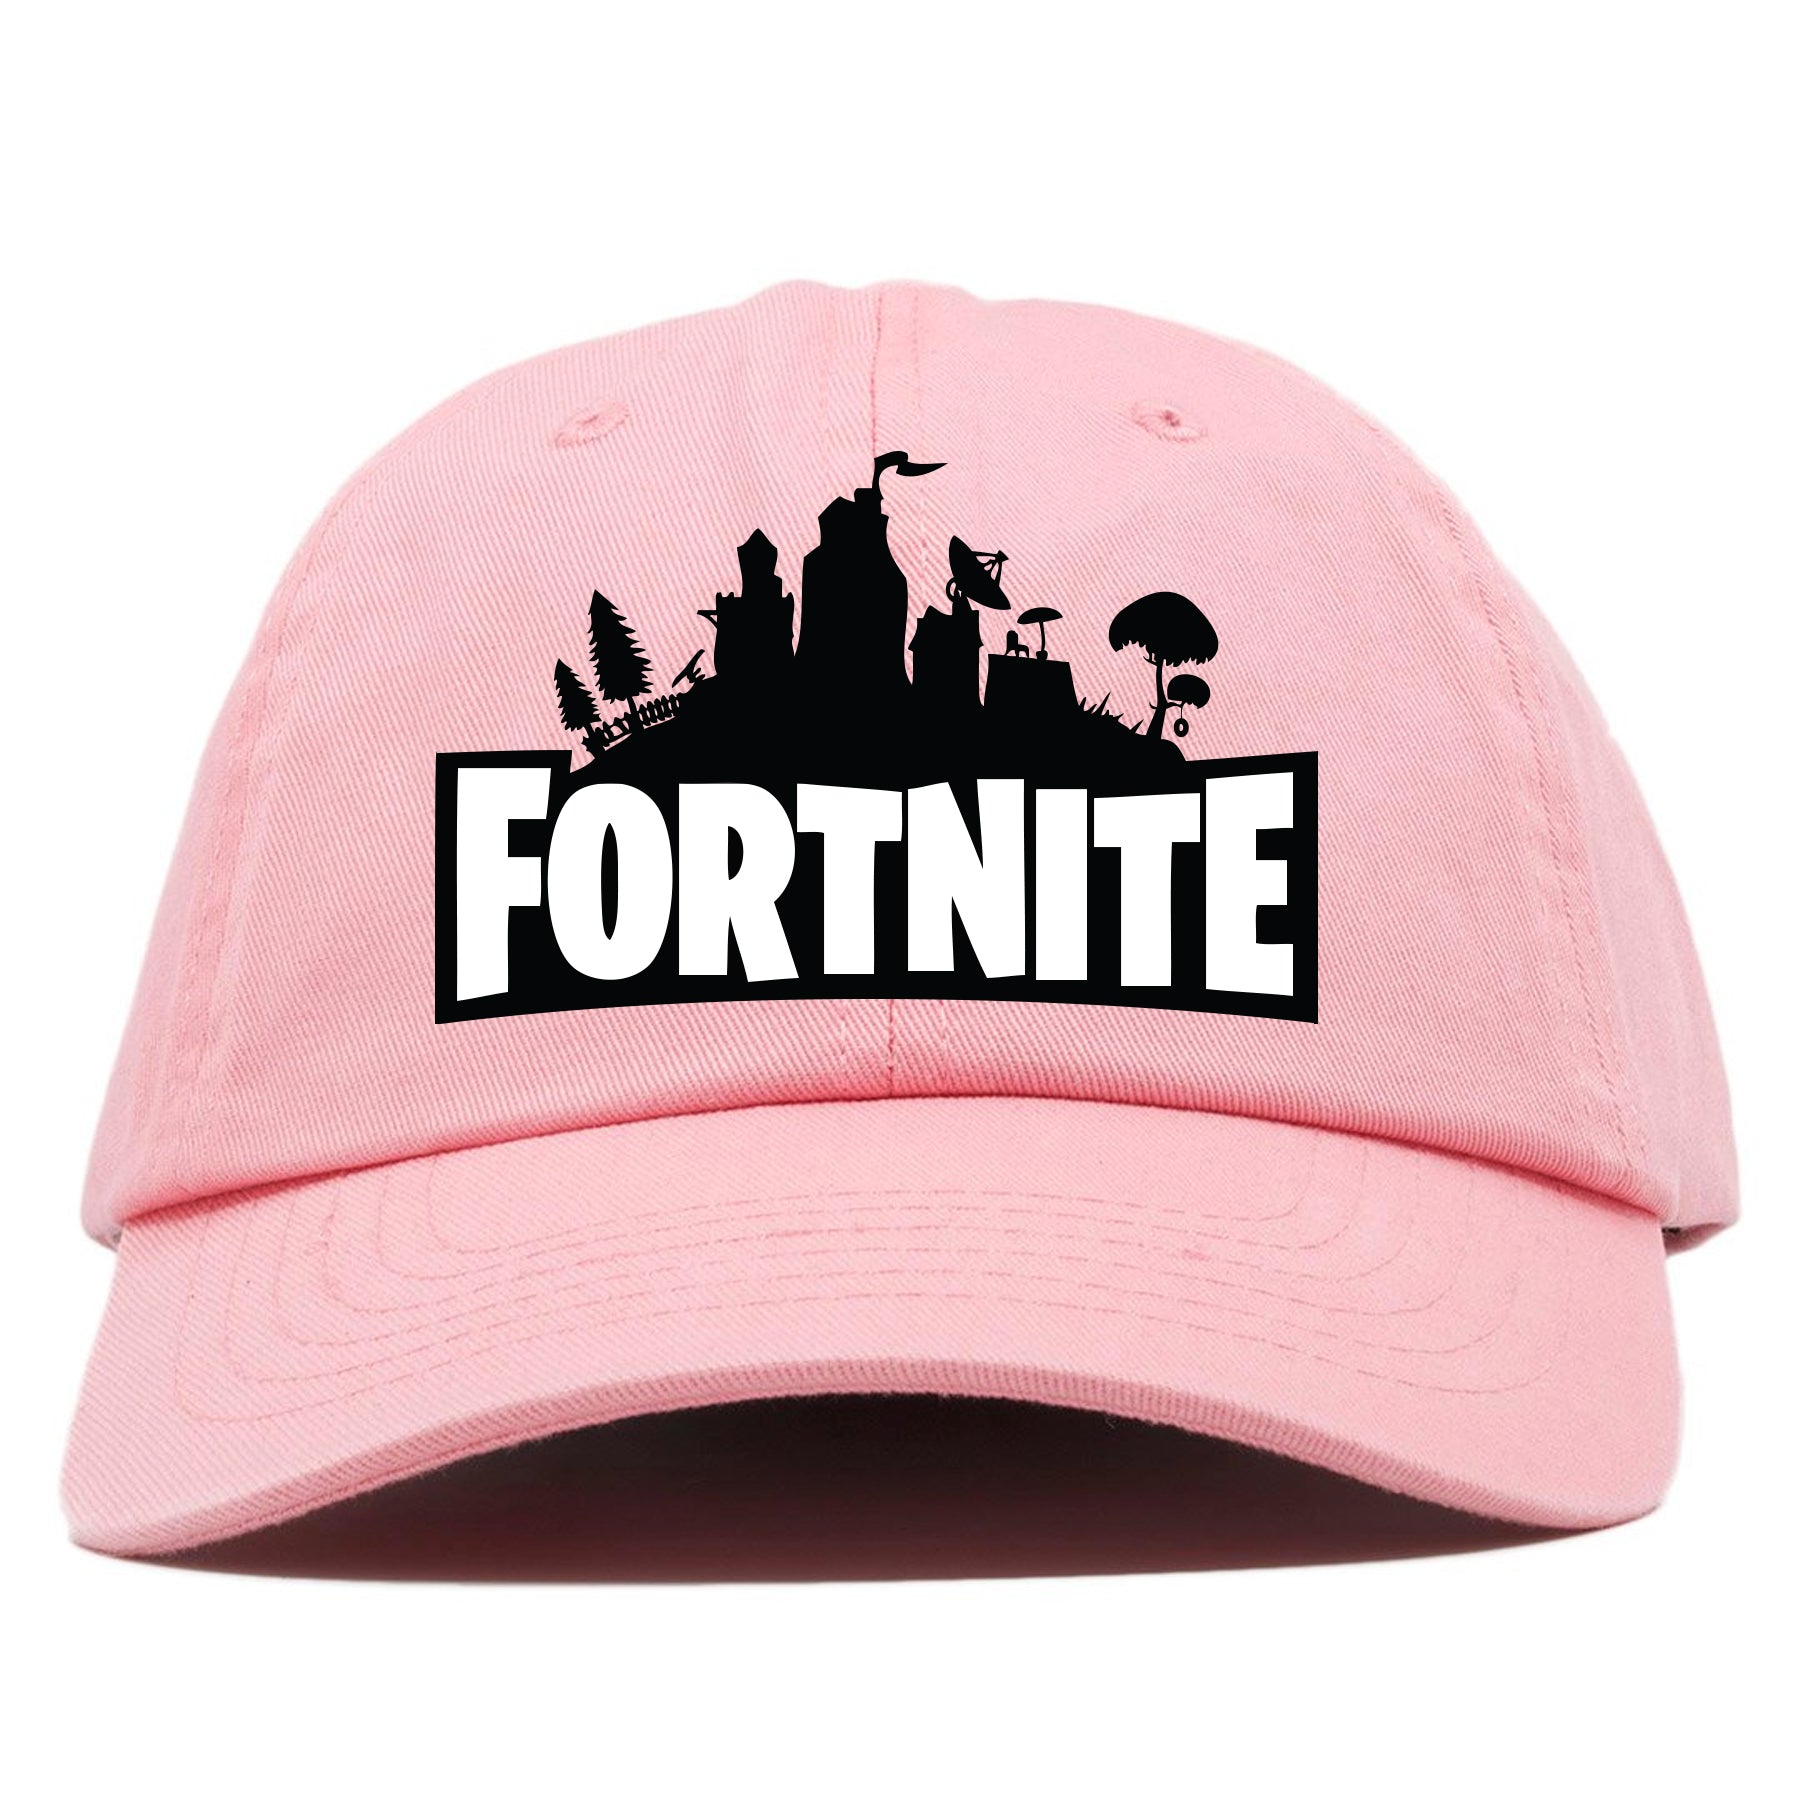 Fortnite Battle Royale Inspired Pink Dad Hat Cap Swag - on the front of the fortnite pink dad hat the fortnite logo is embroidered in